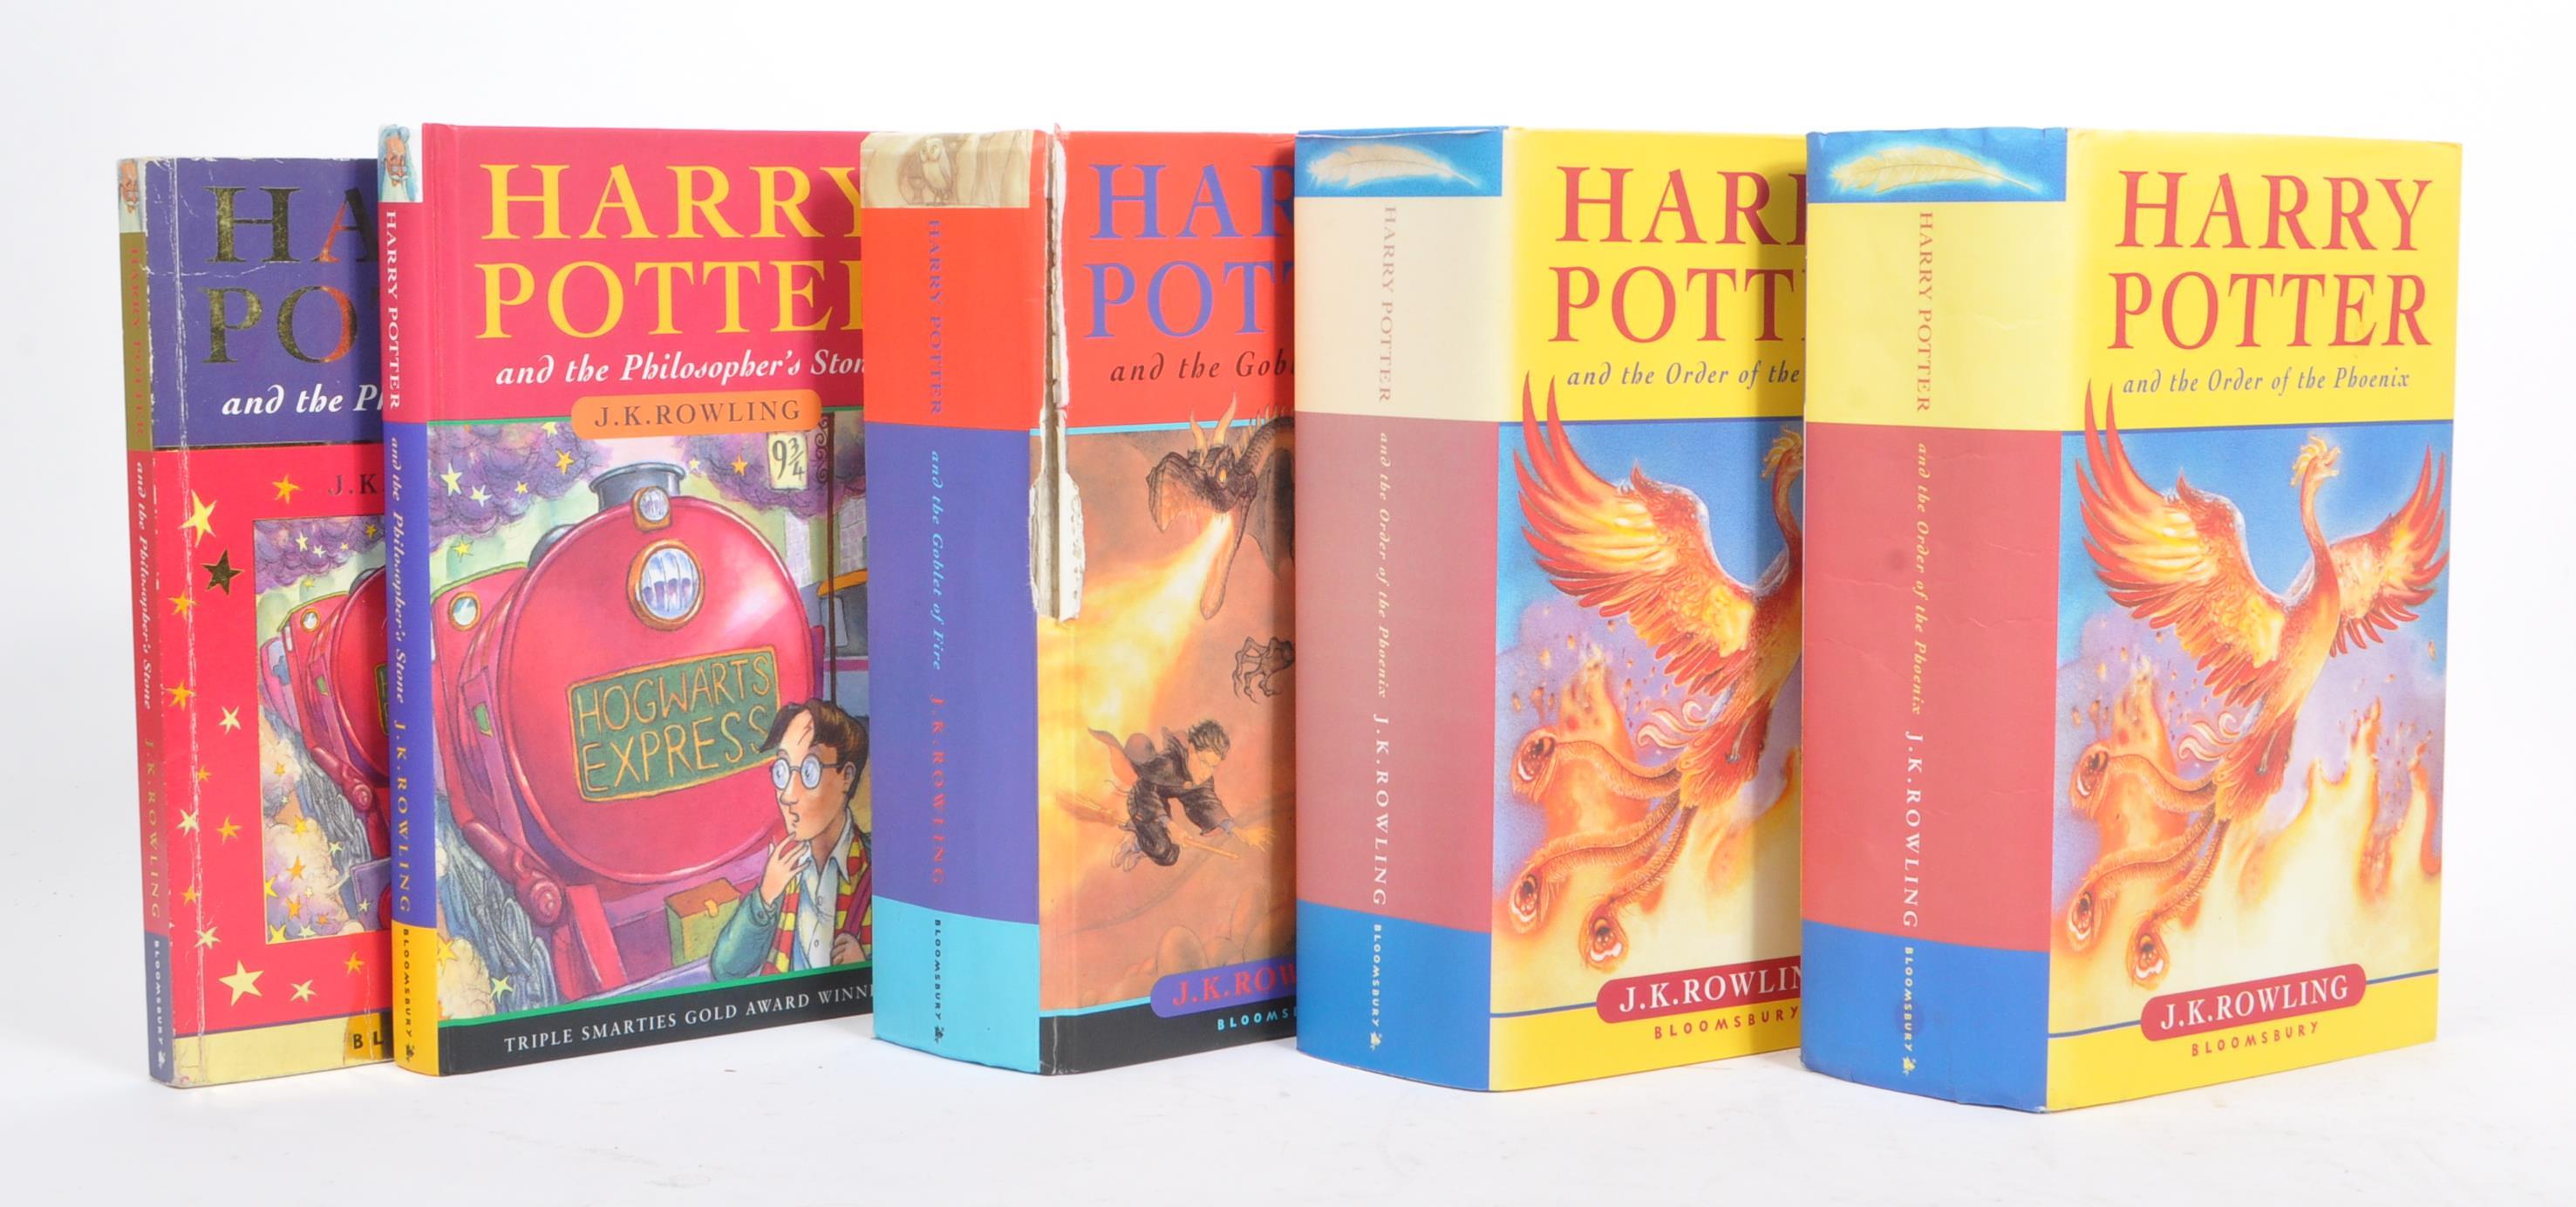 J. K. ROWLING - COLLECTION OF HARRY POTTER BOOKS - Image 2 of 10